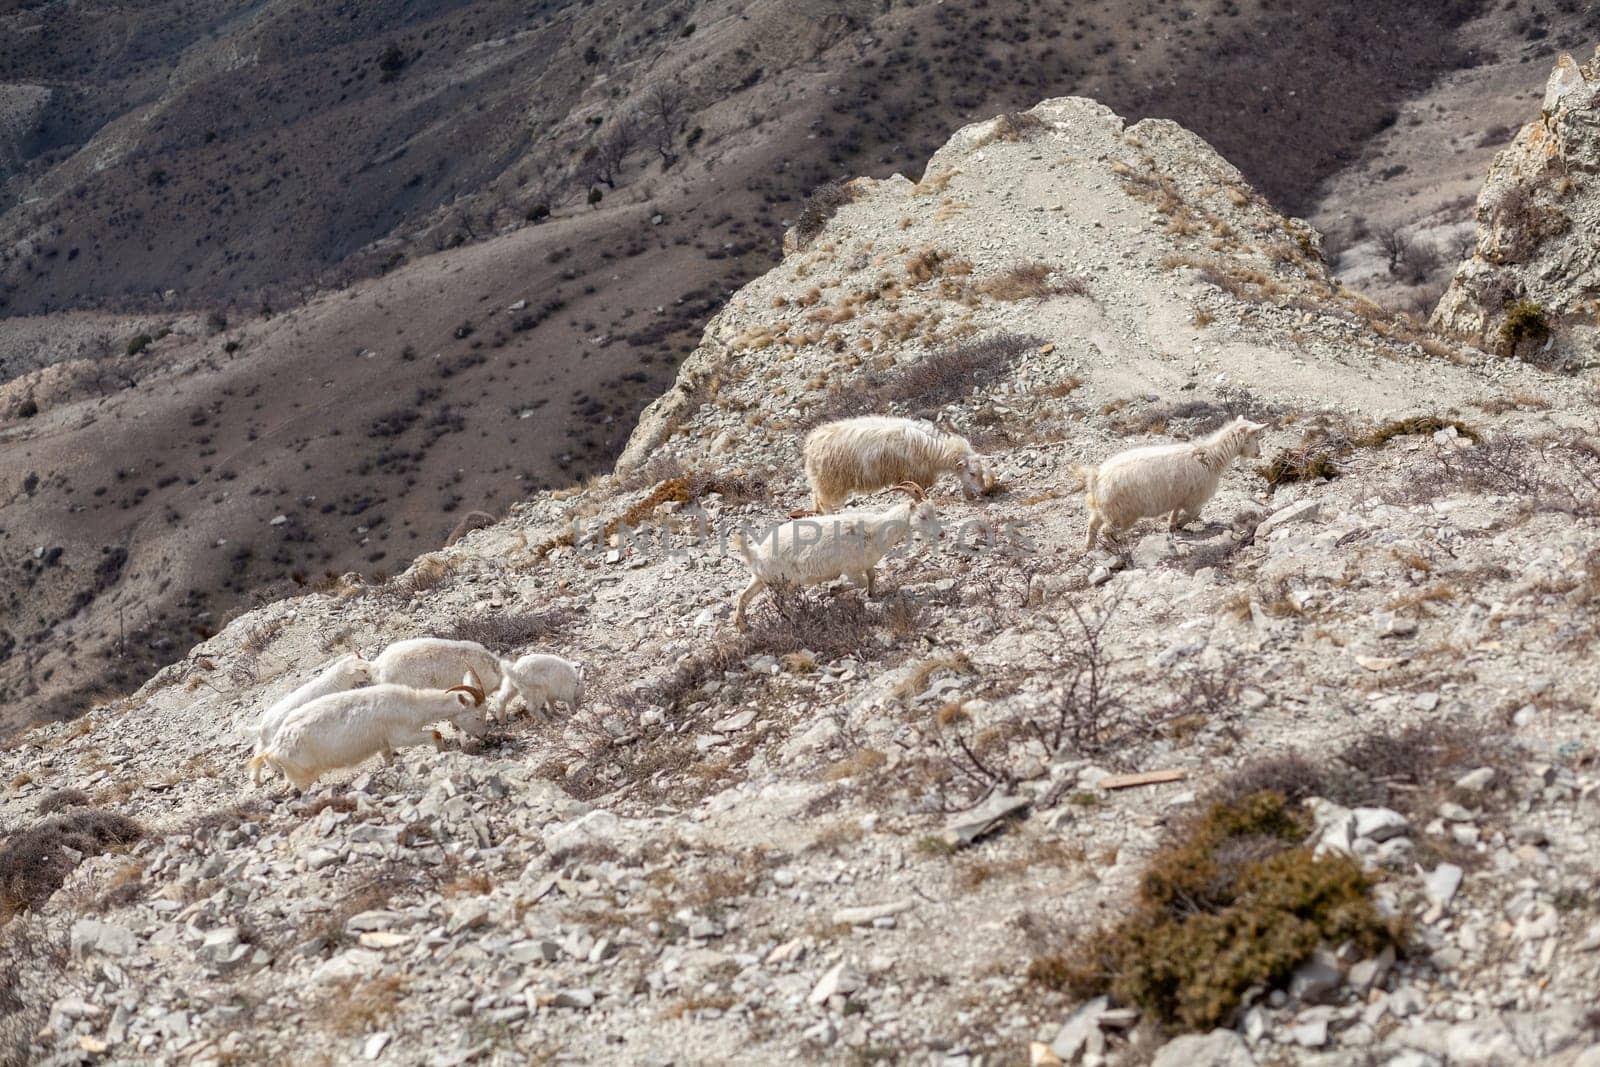 Goats are resting in the rocks on the mountainside. White goats walk and graze on a steep mountainside in Dagestan, Russia.